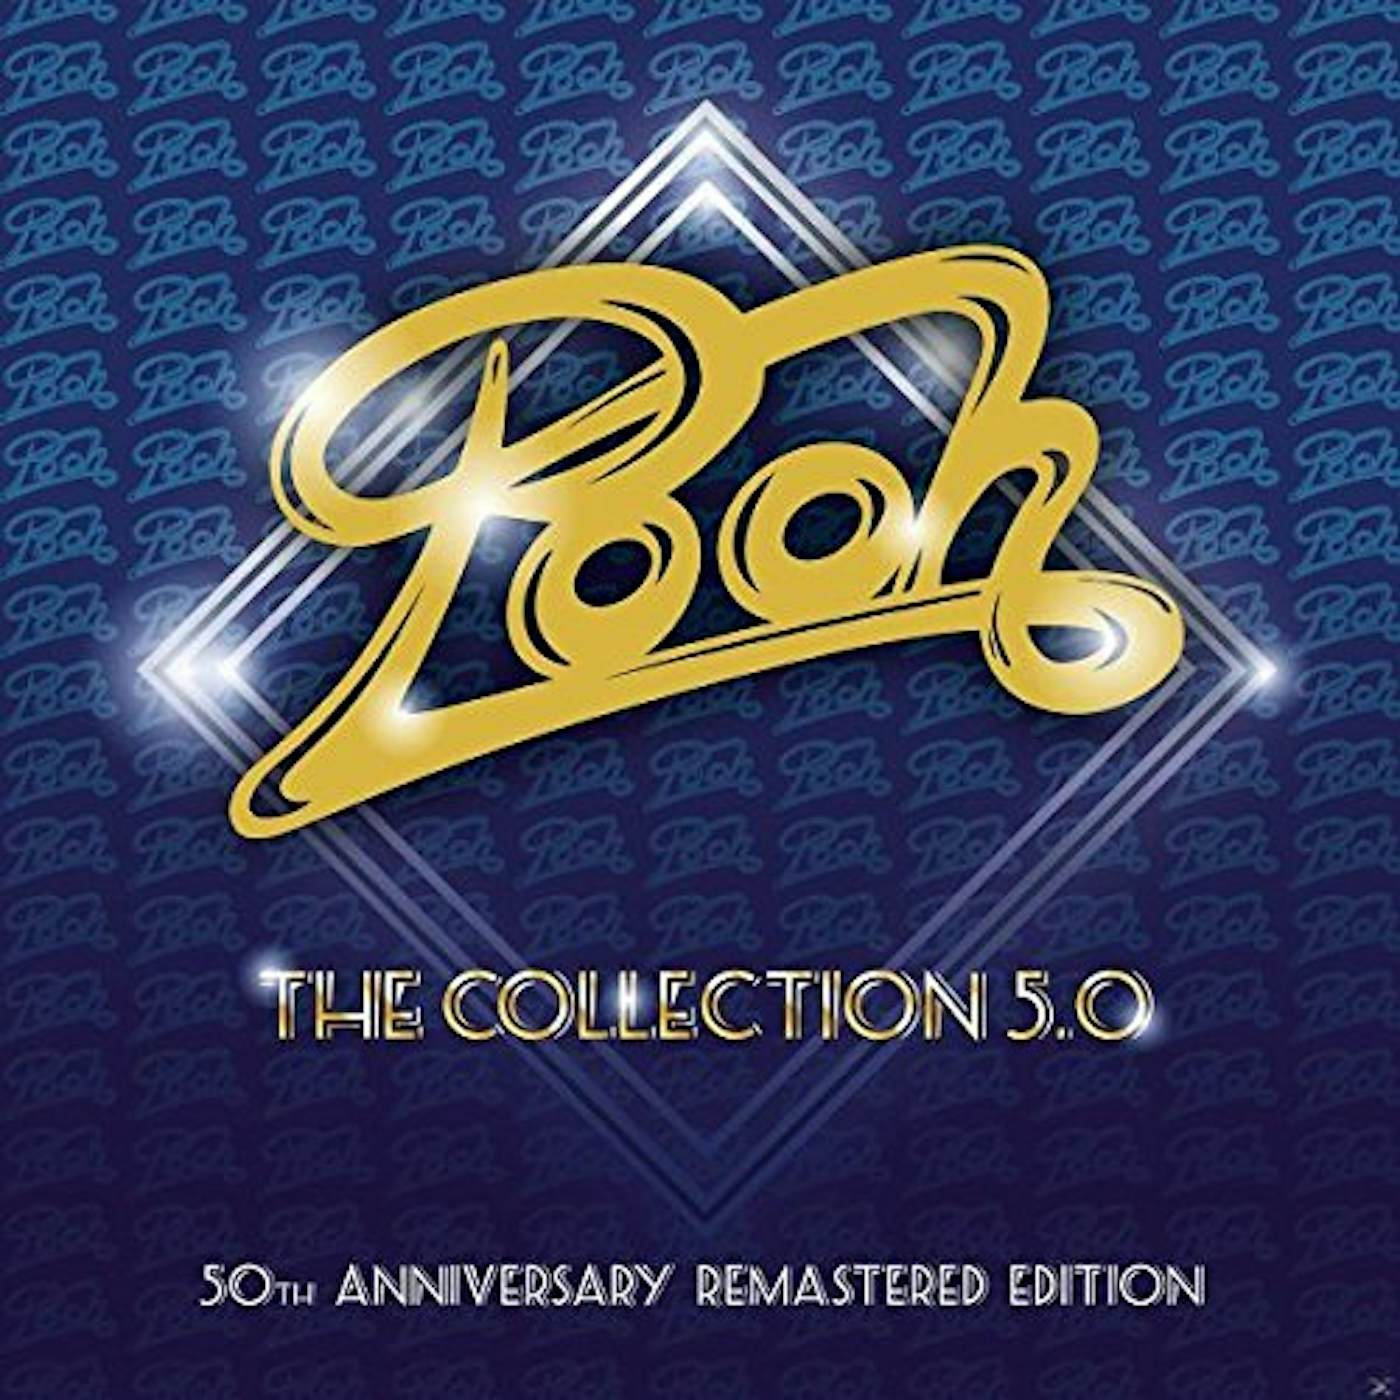 Pooh COLLECTION 5.0 CD